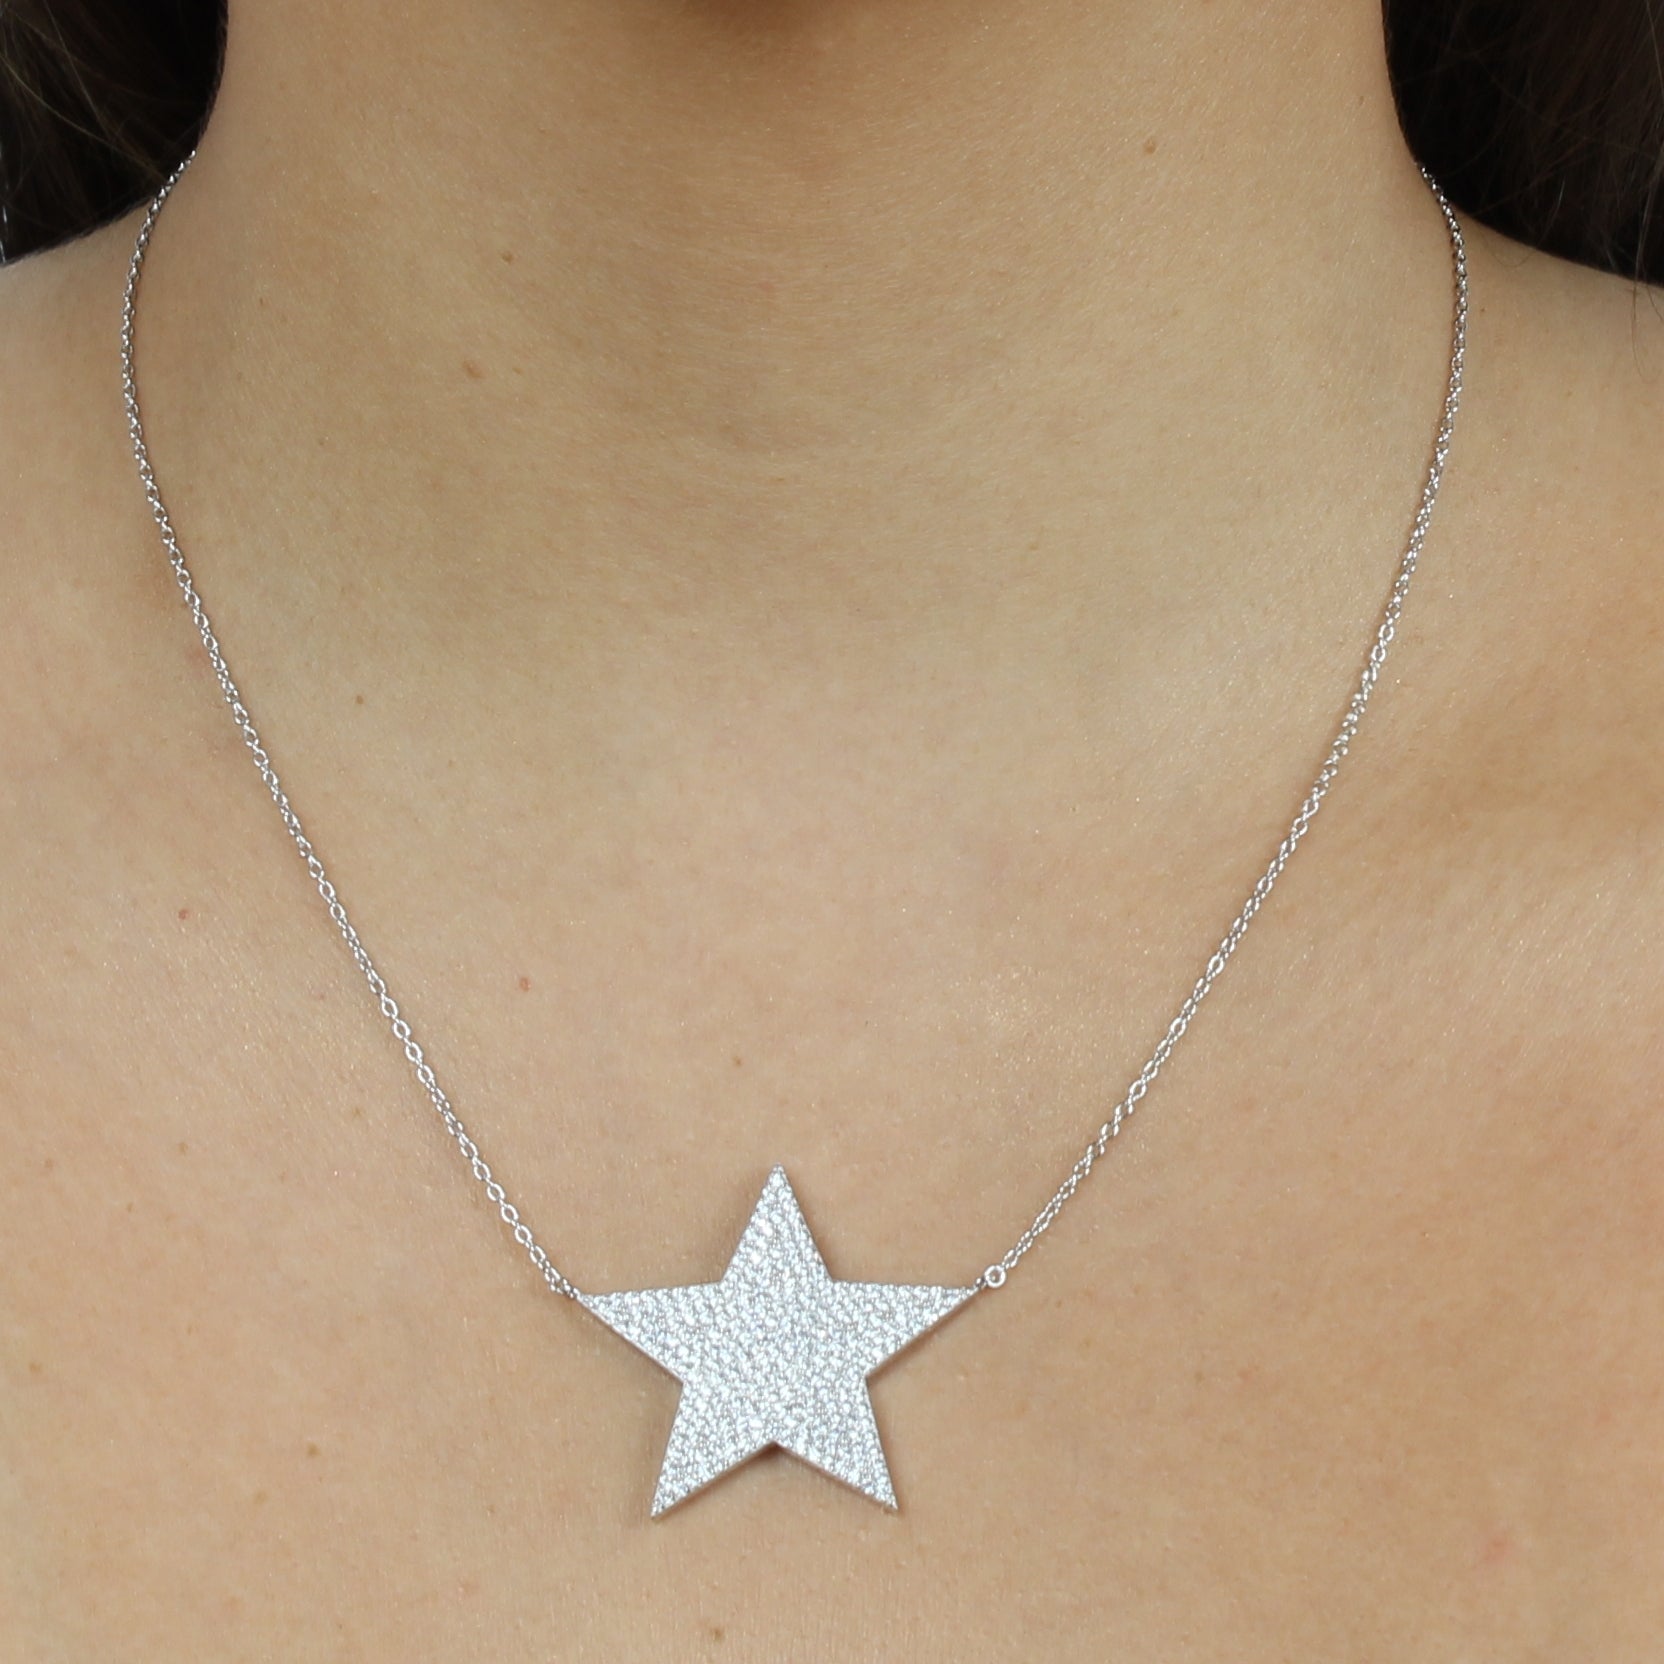 JUMBO PAVE STAR NECKLACE